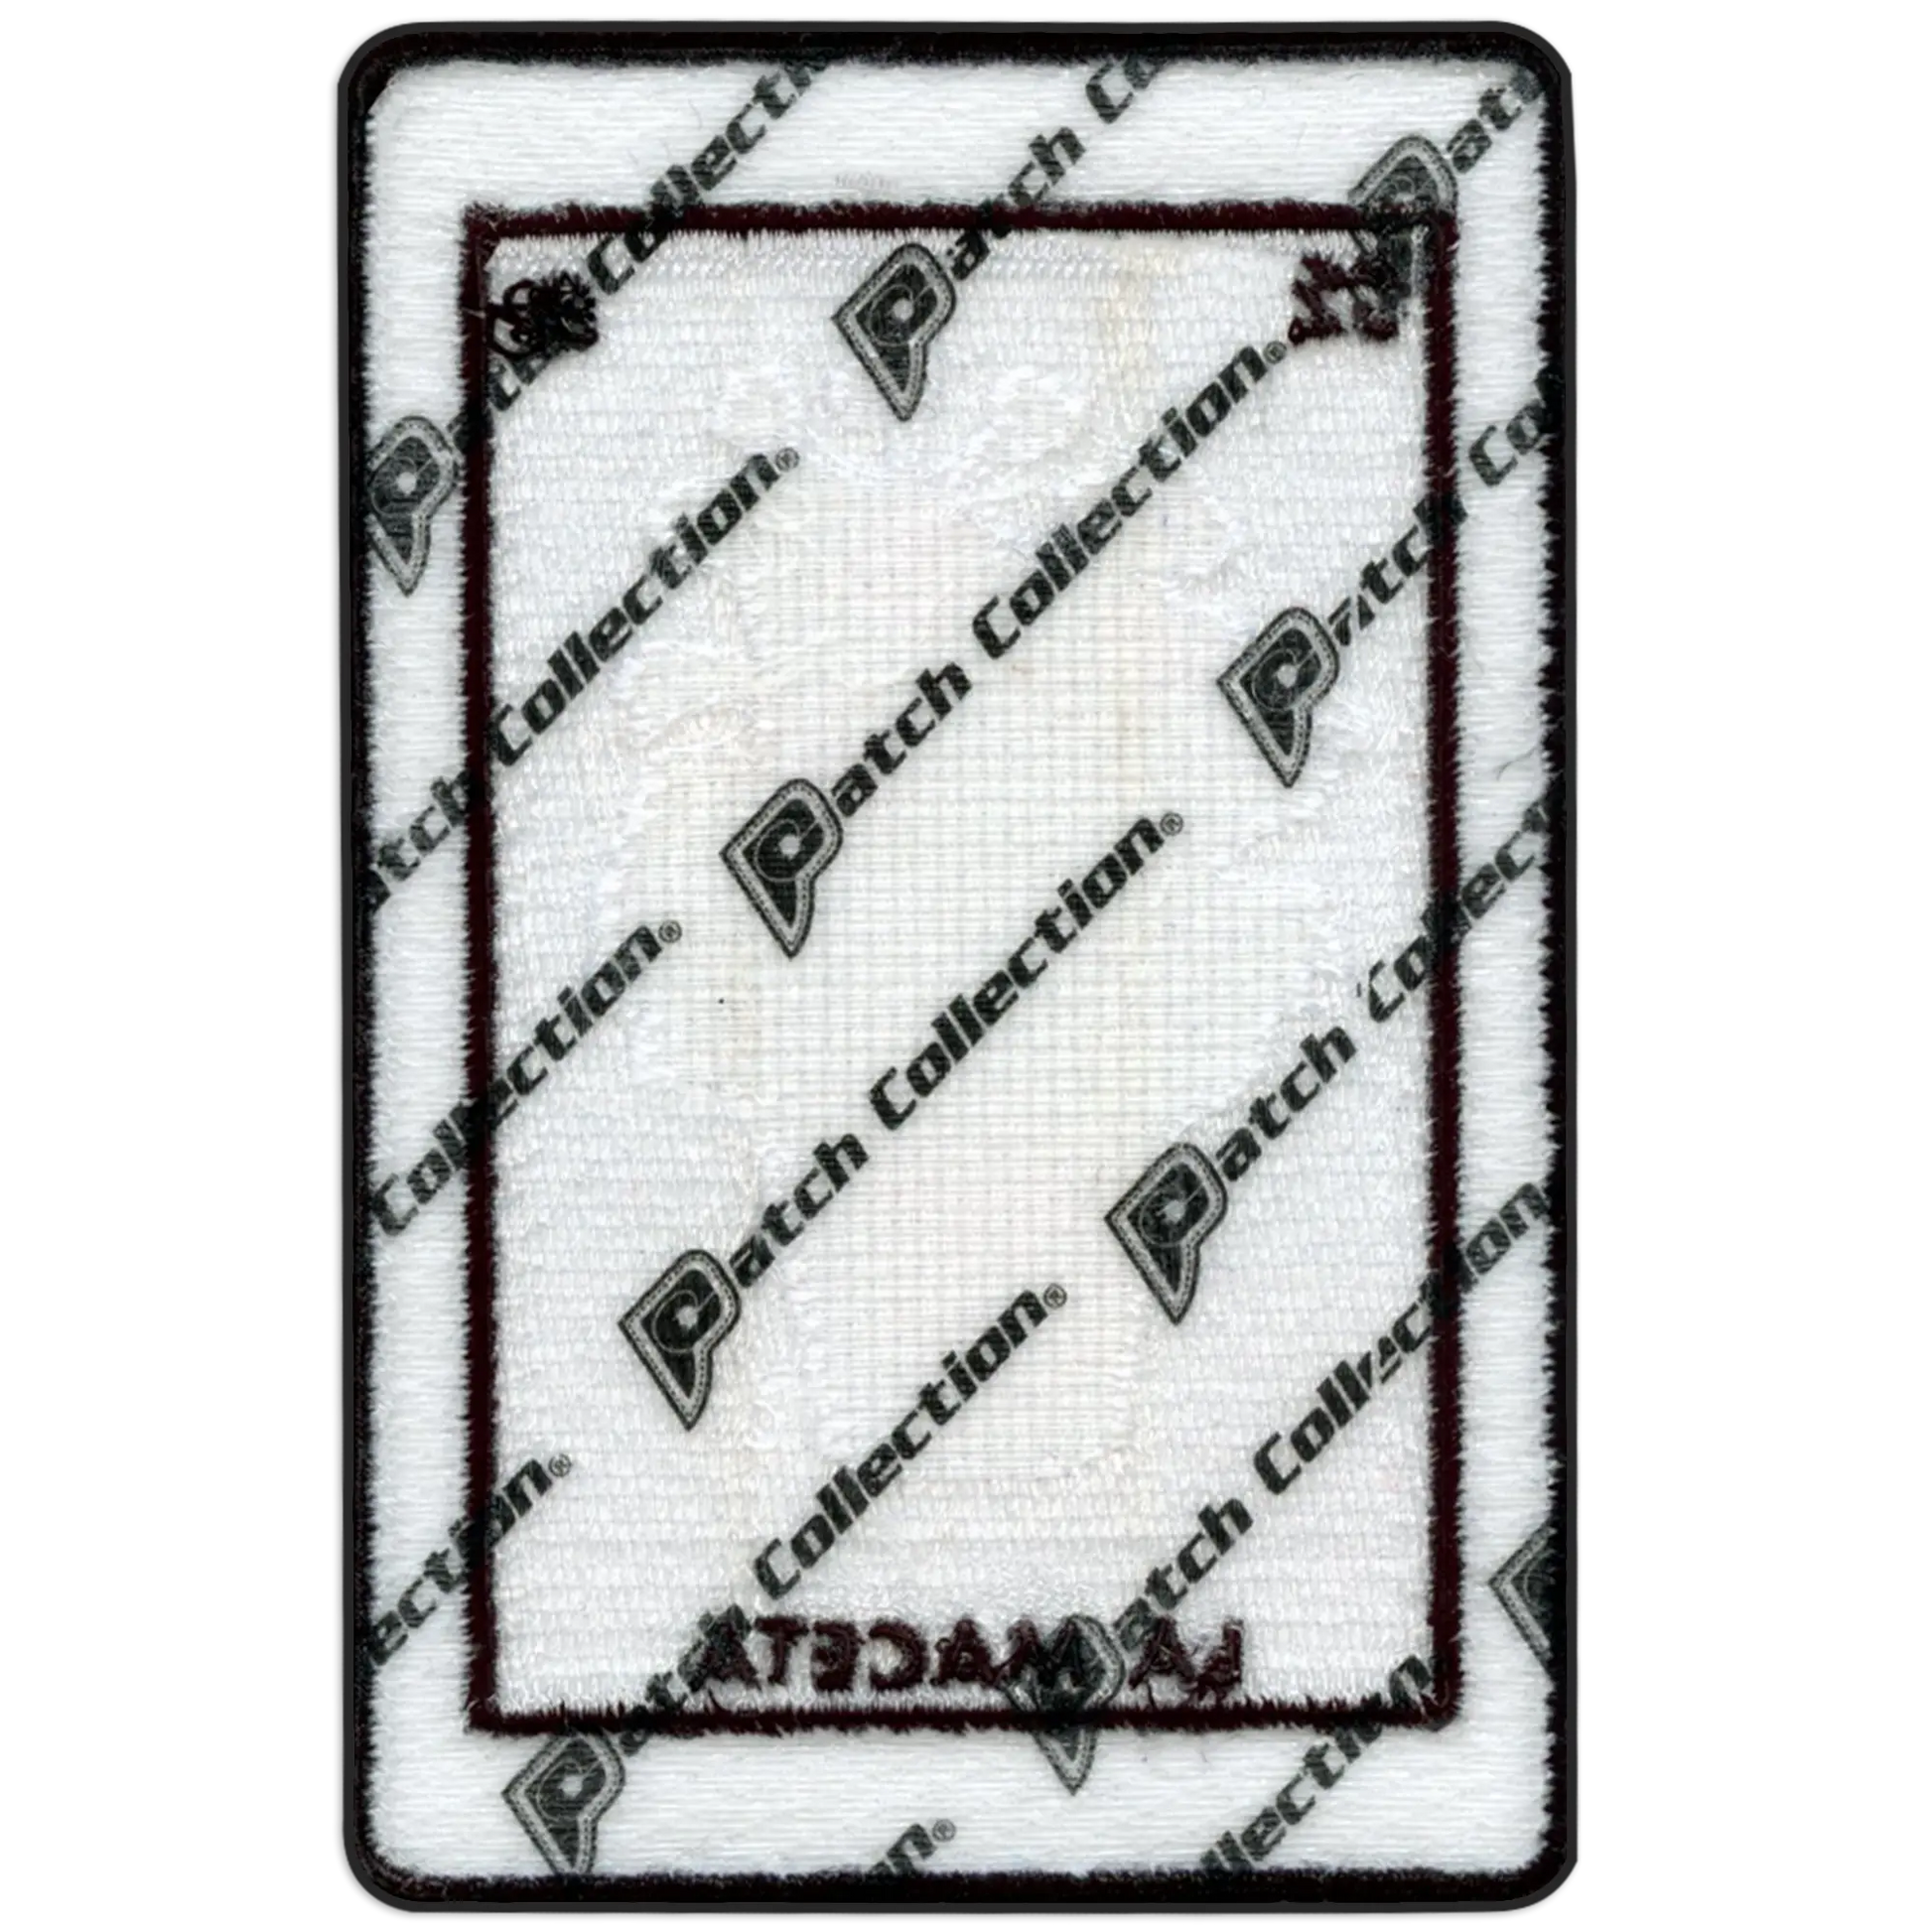 El Barril 9 Patch Mexican Loteria Card Sublimated Embroidery Iron On